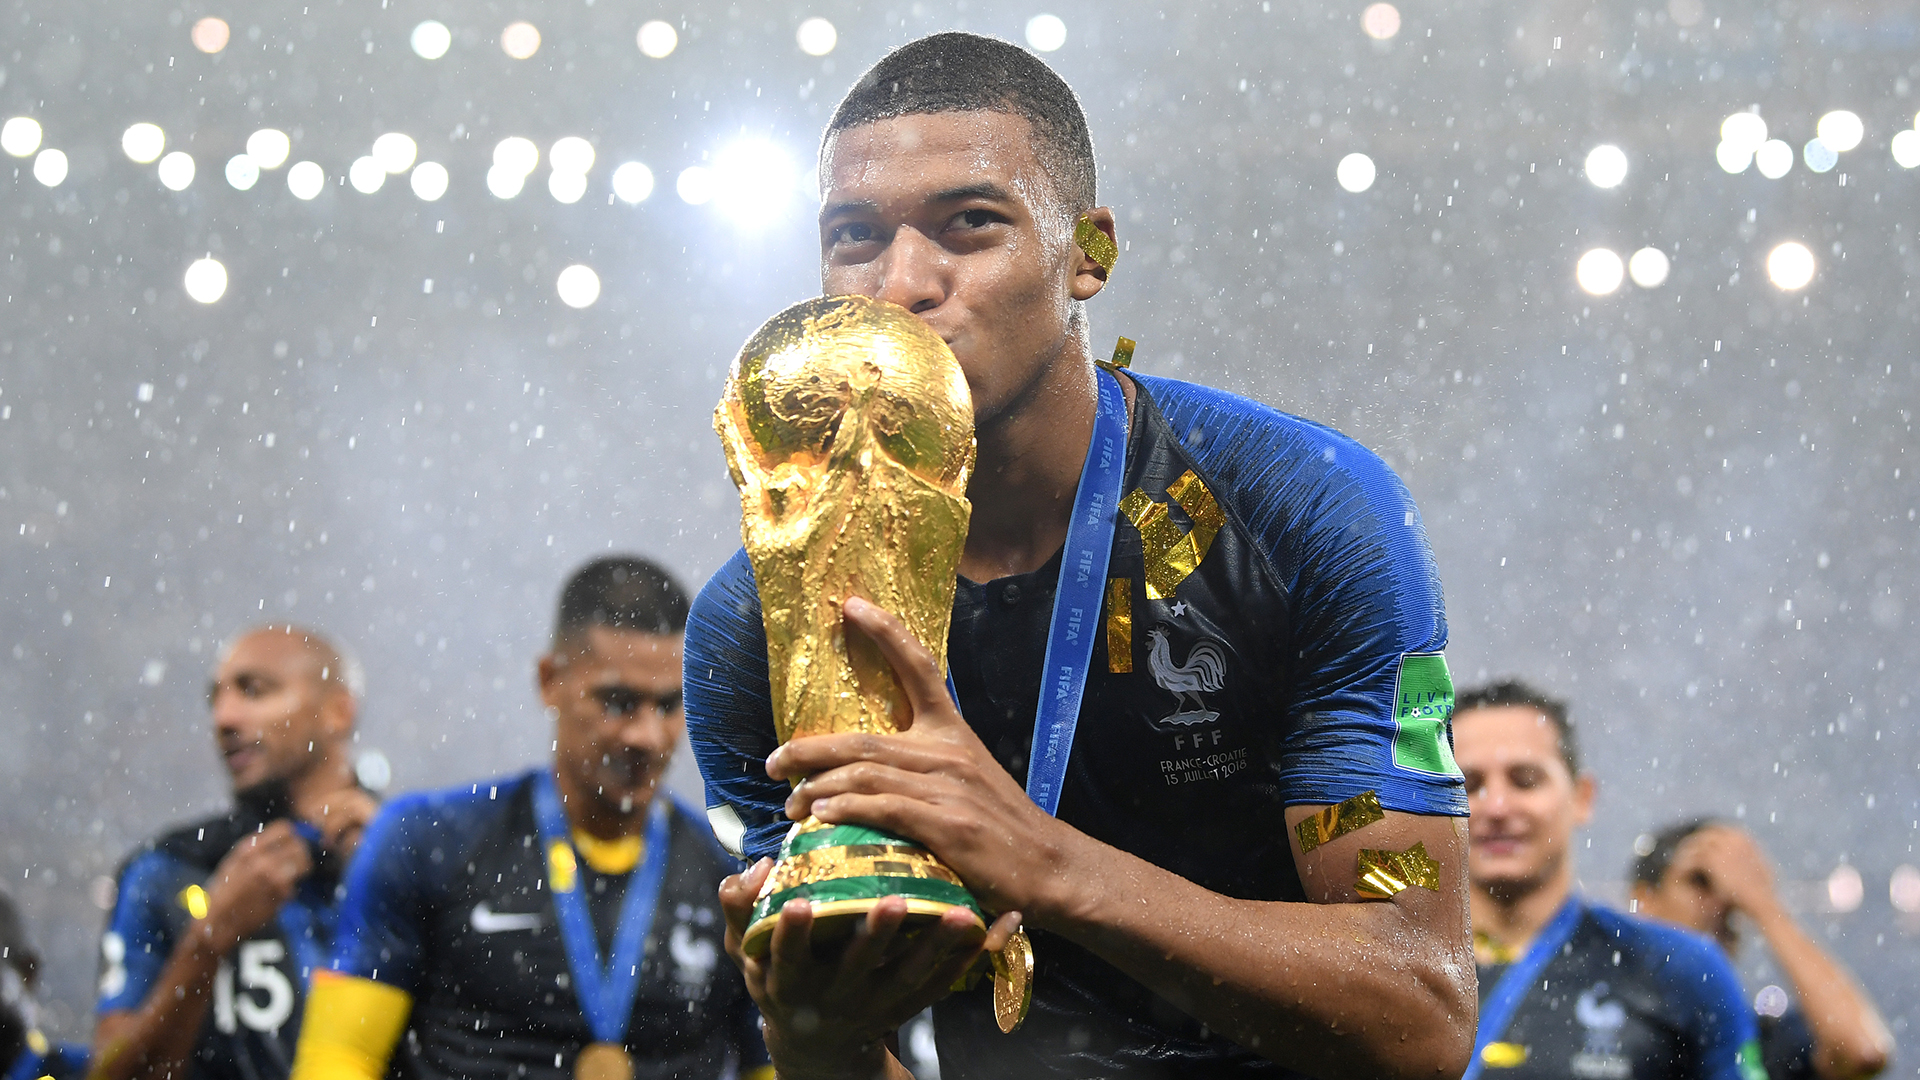 FIFA World Cup 2022 Groups, schedule, dates, TV and kick-off times, all you need to know